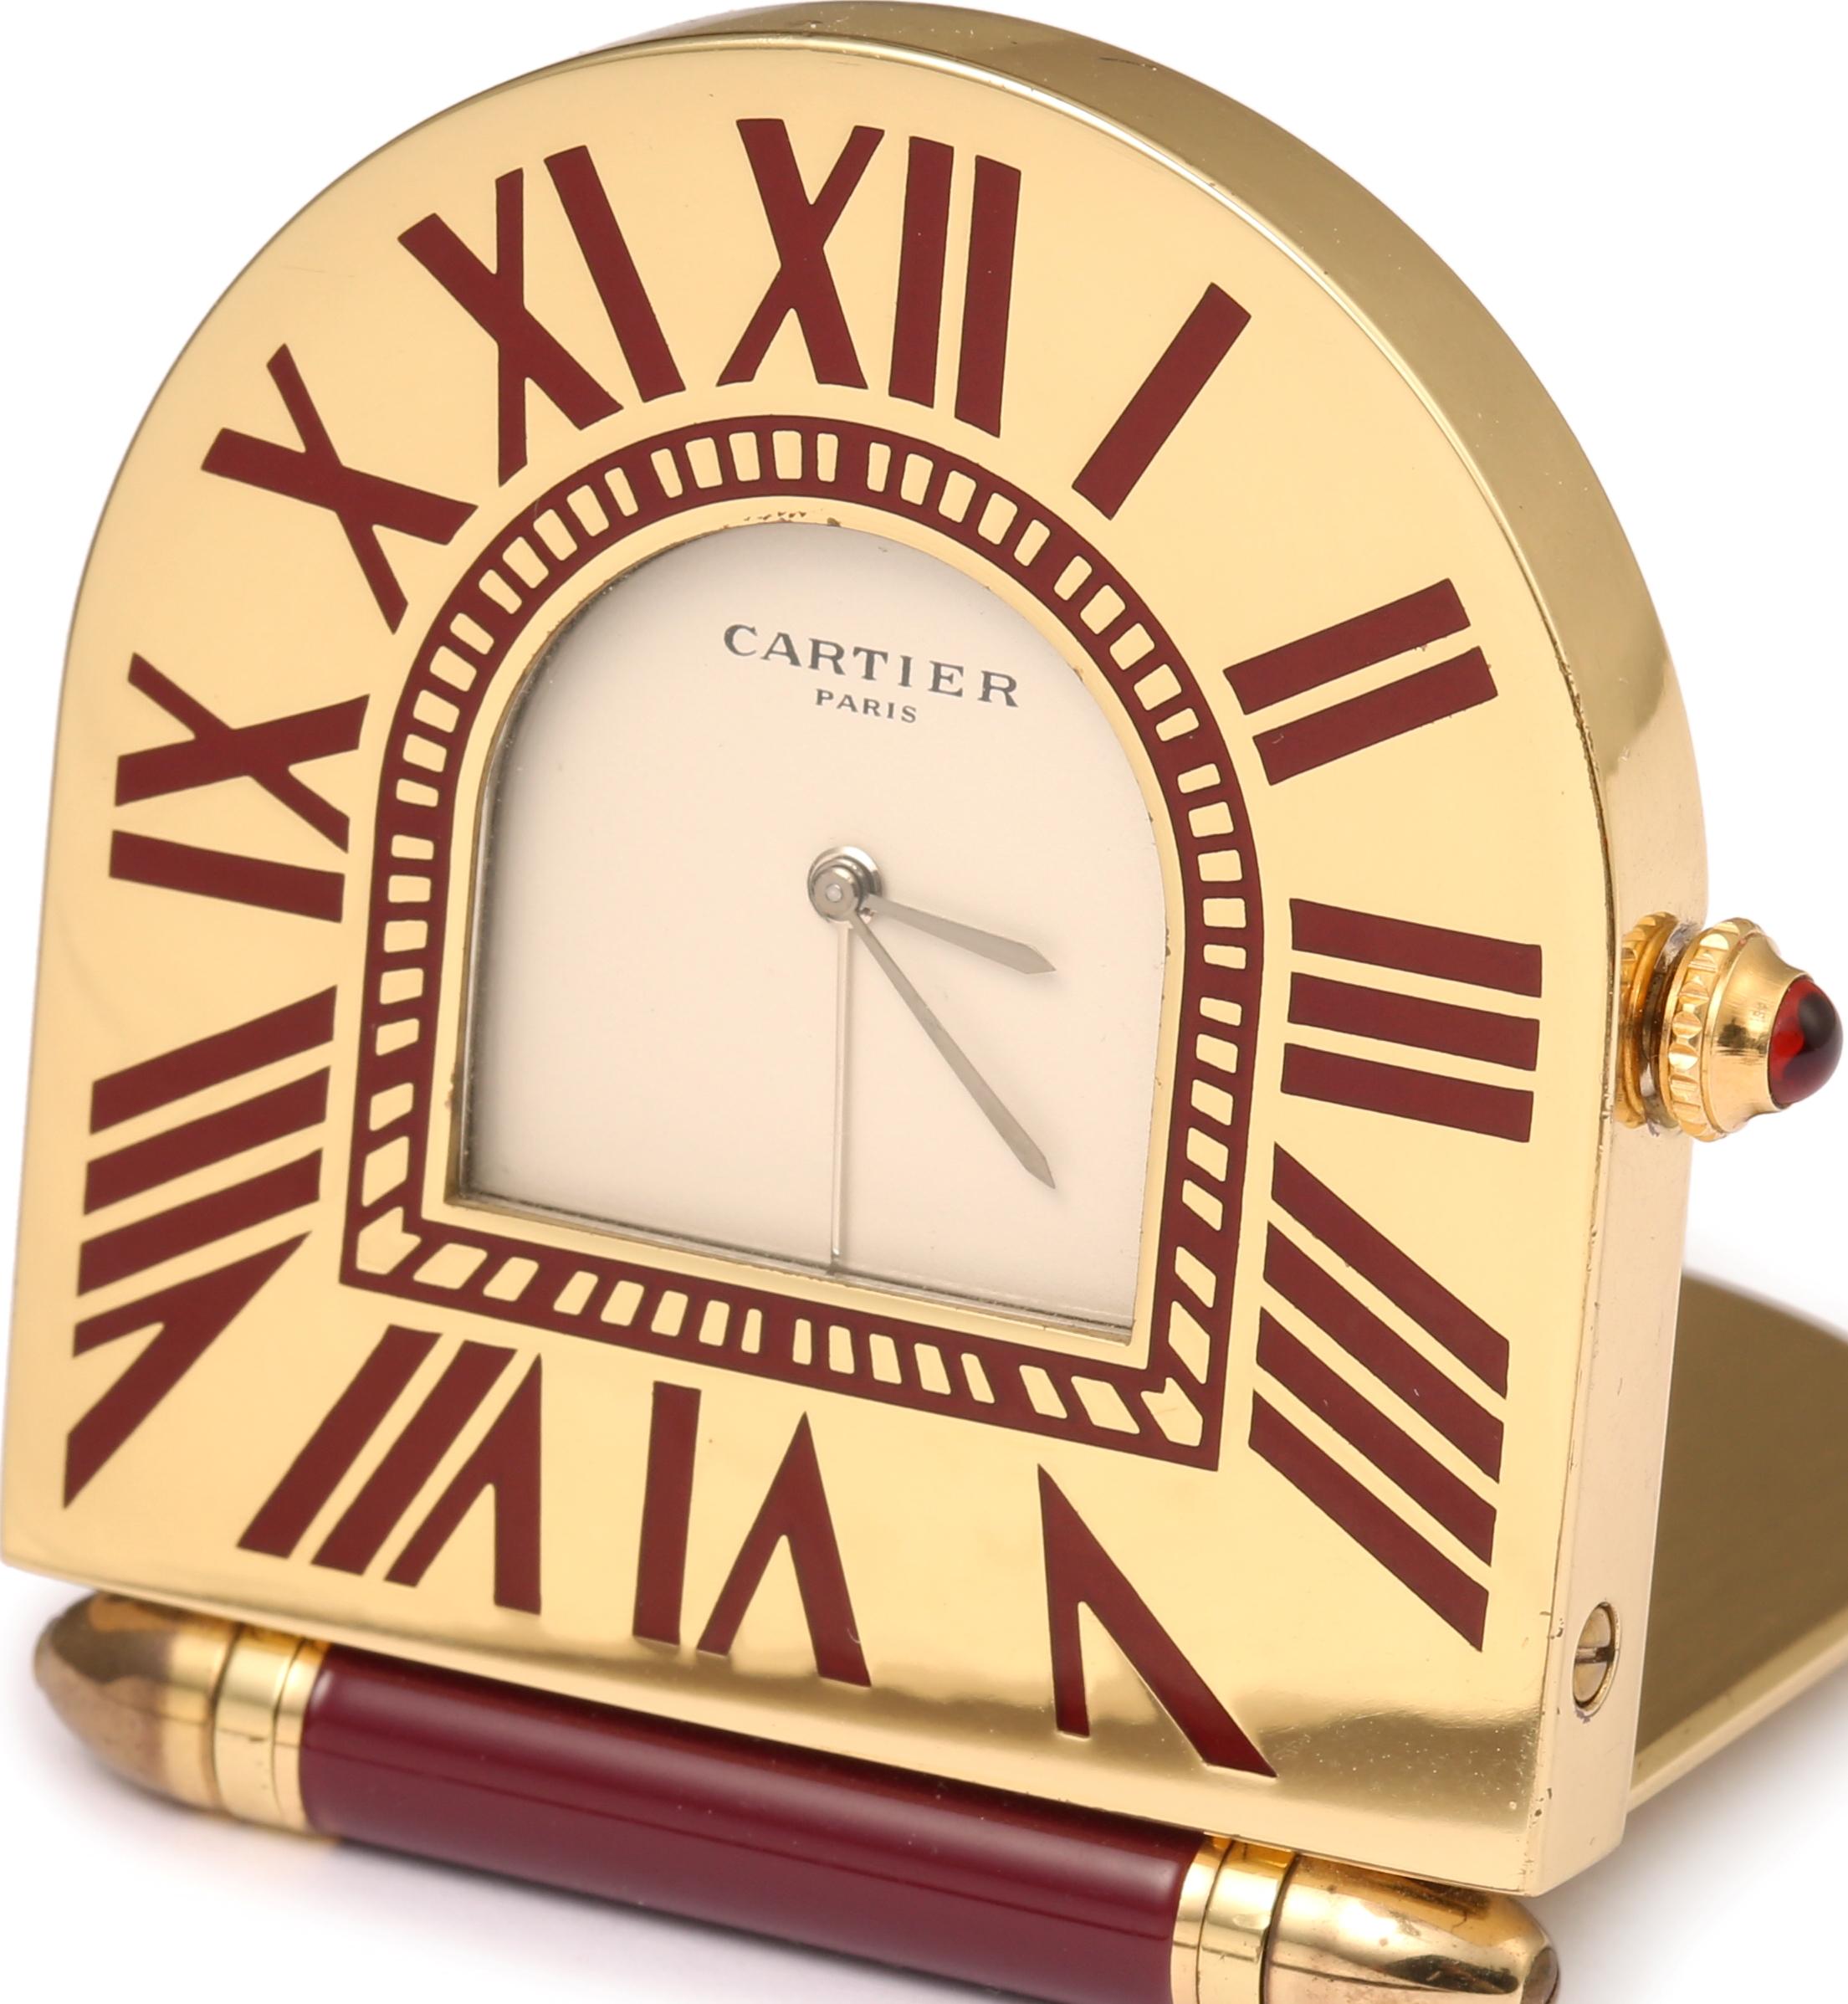 Sublime Cartier travel clock in gilded brass and red lacquer.

Thanks to its articulated plate, it opens to reveal the dial with its red Roman numerals.

The crown stem is set with a red stone.

Dimensions: 6 x 5 x 1 cm (2.362 x 1.969 x 0.394